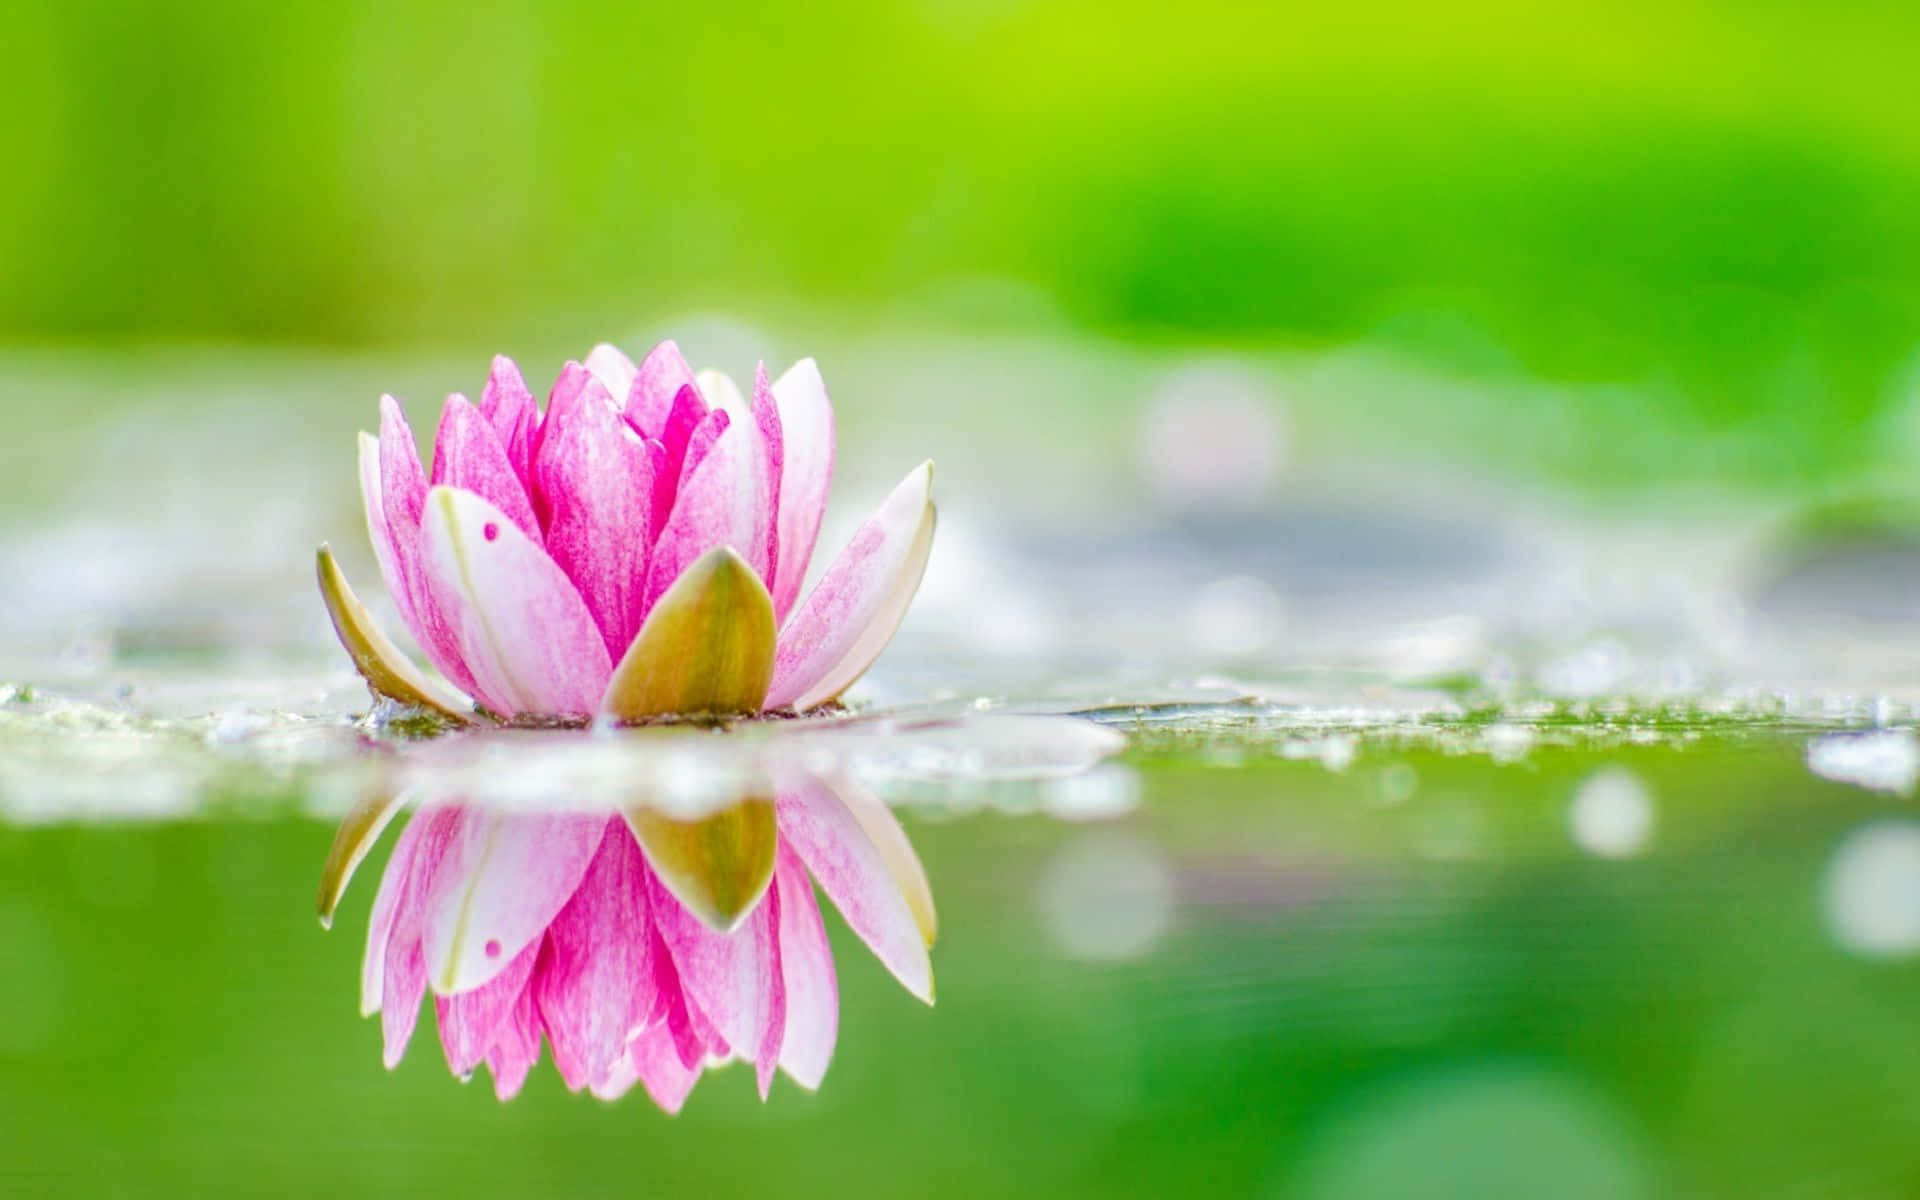 The beauty of the Lotus flower